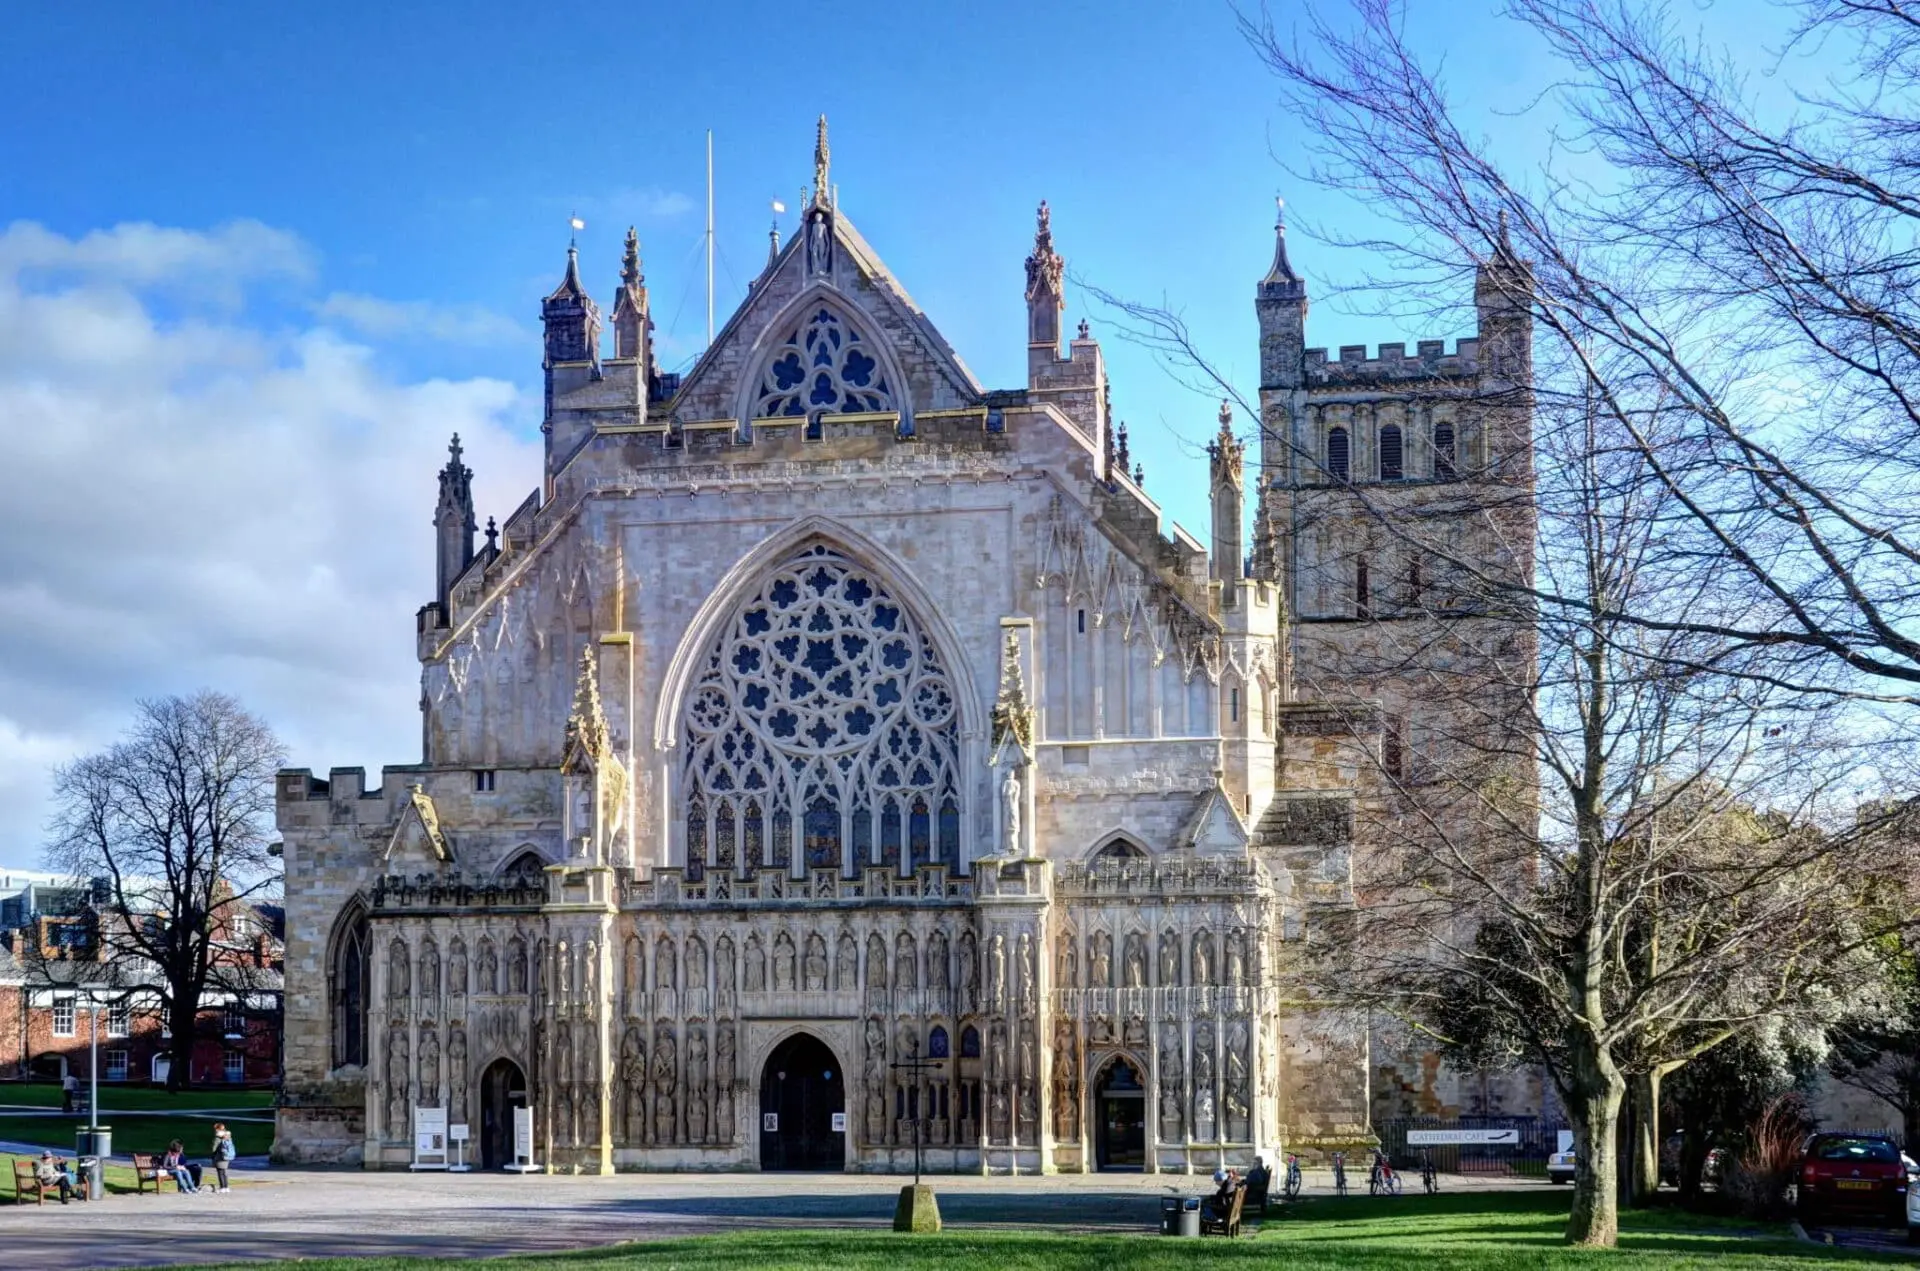 Photographs of Exeter